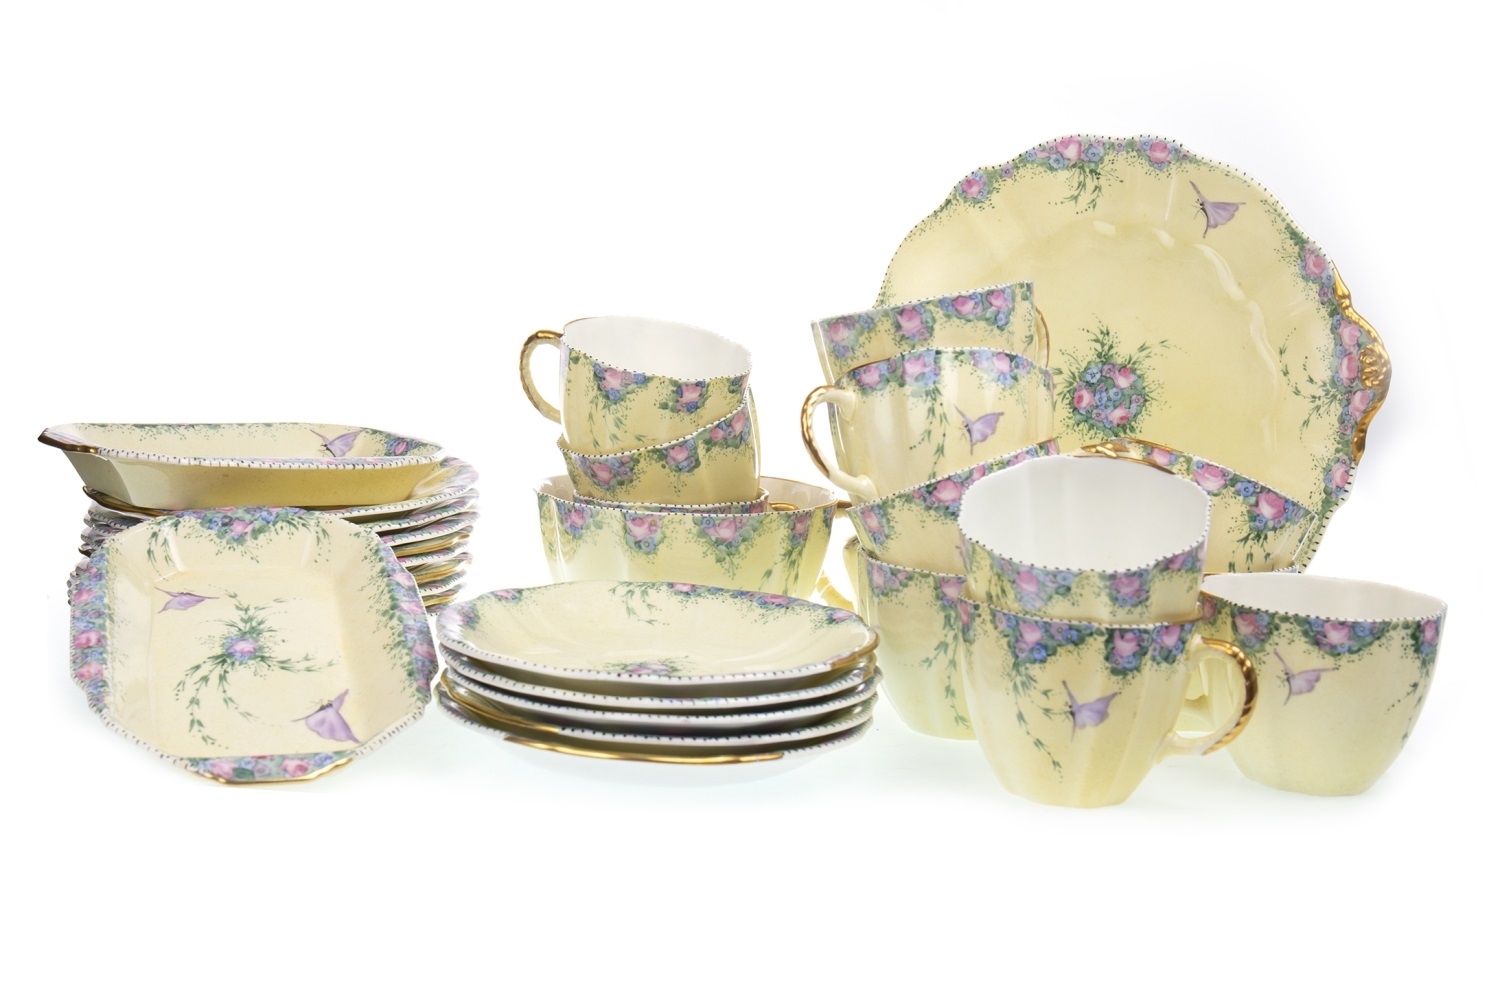 A ROYAL CROWN DERBY HAND-PAINTED TEA SERVICE